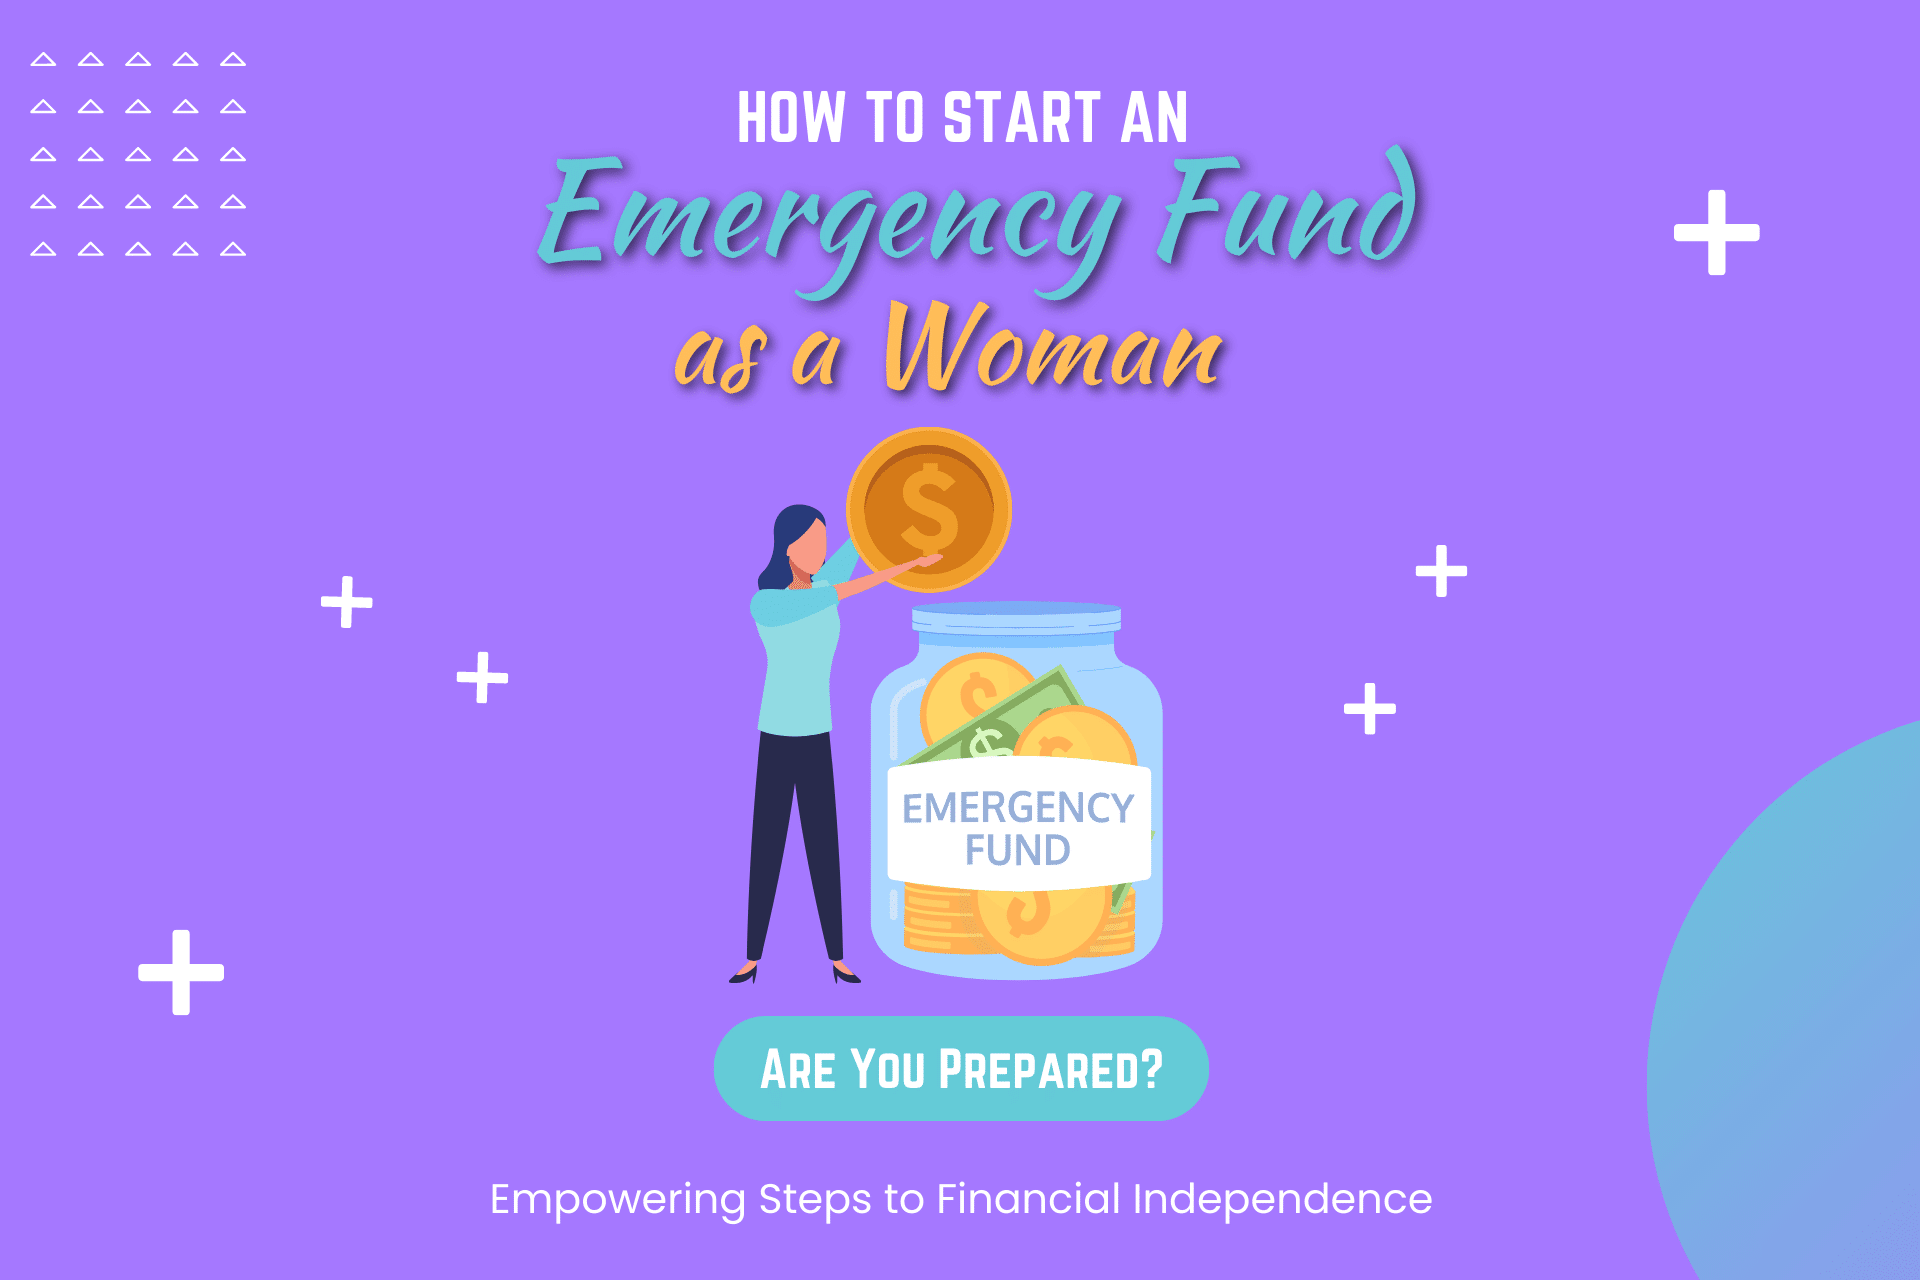 how to start an emergency fund as a woman